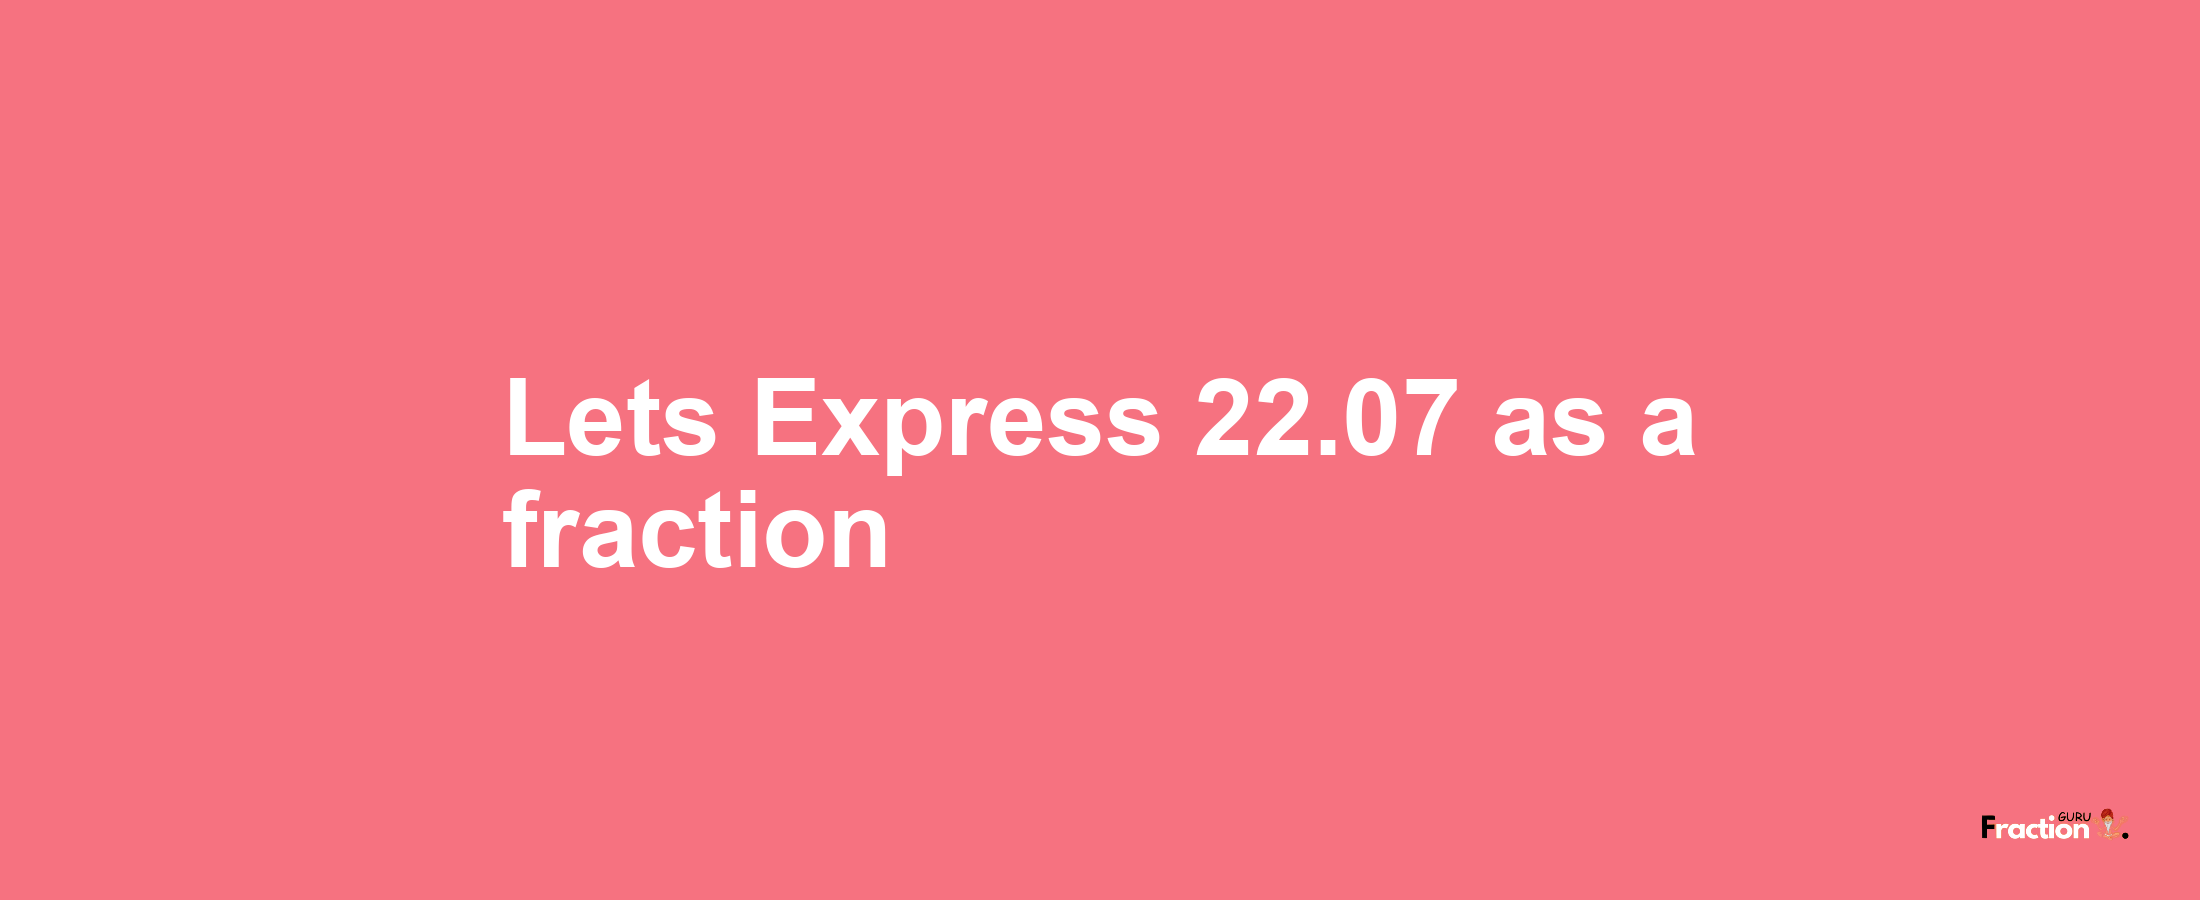 Lets Express 22.07 as afraction